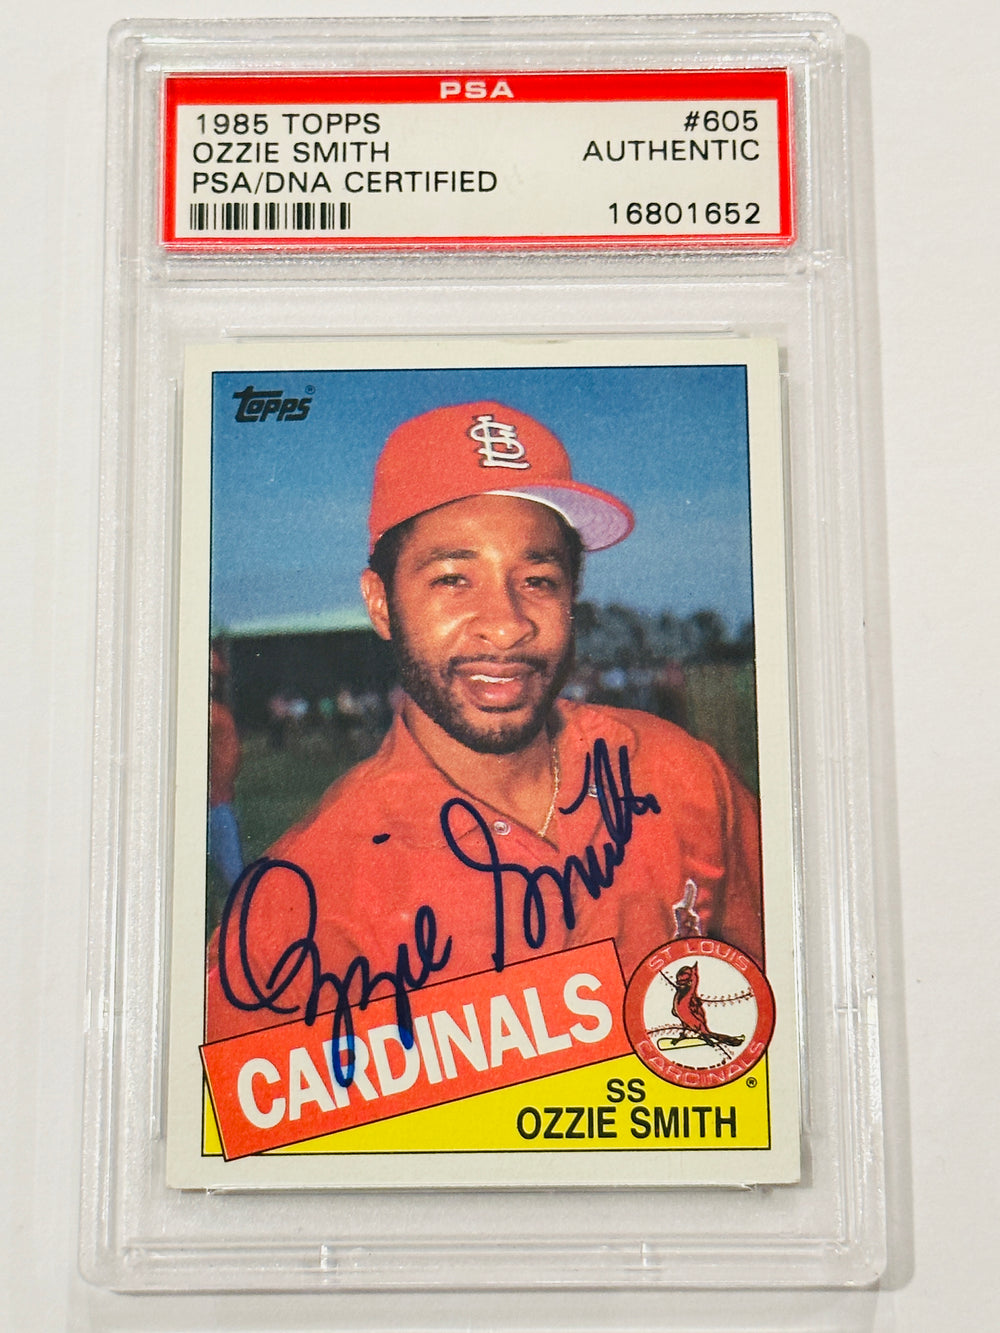 Ozzie Smith 1985 Topps Cardinals Signed Baseball Card PSA